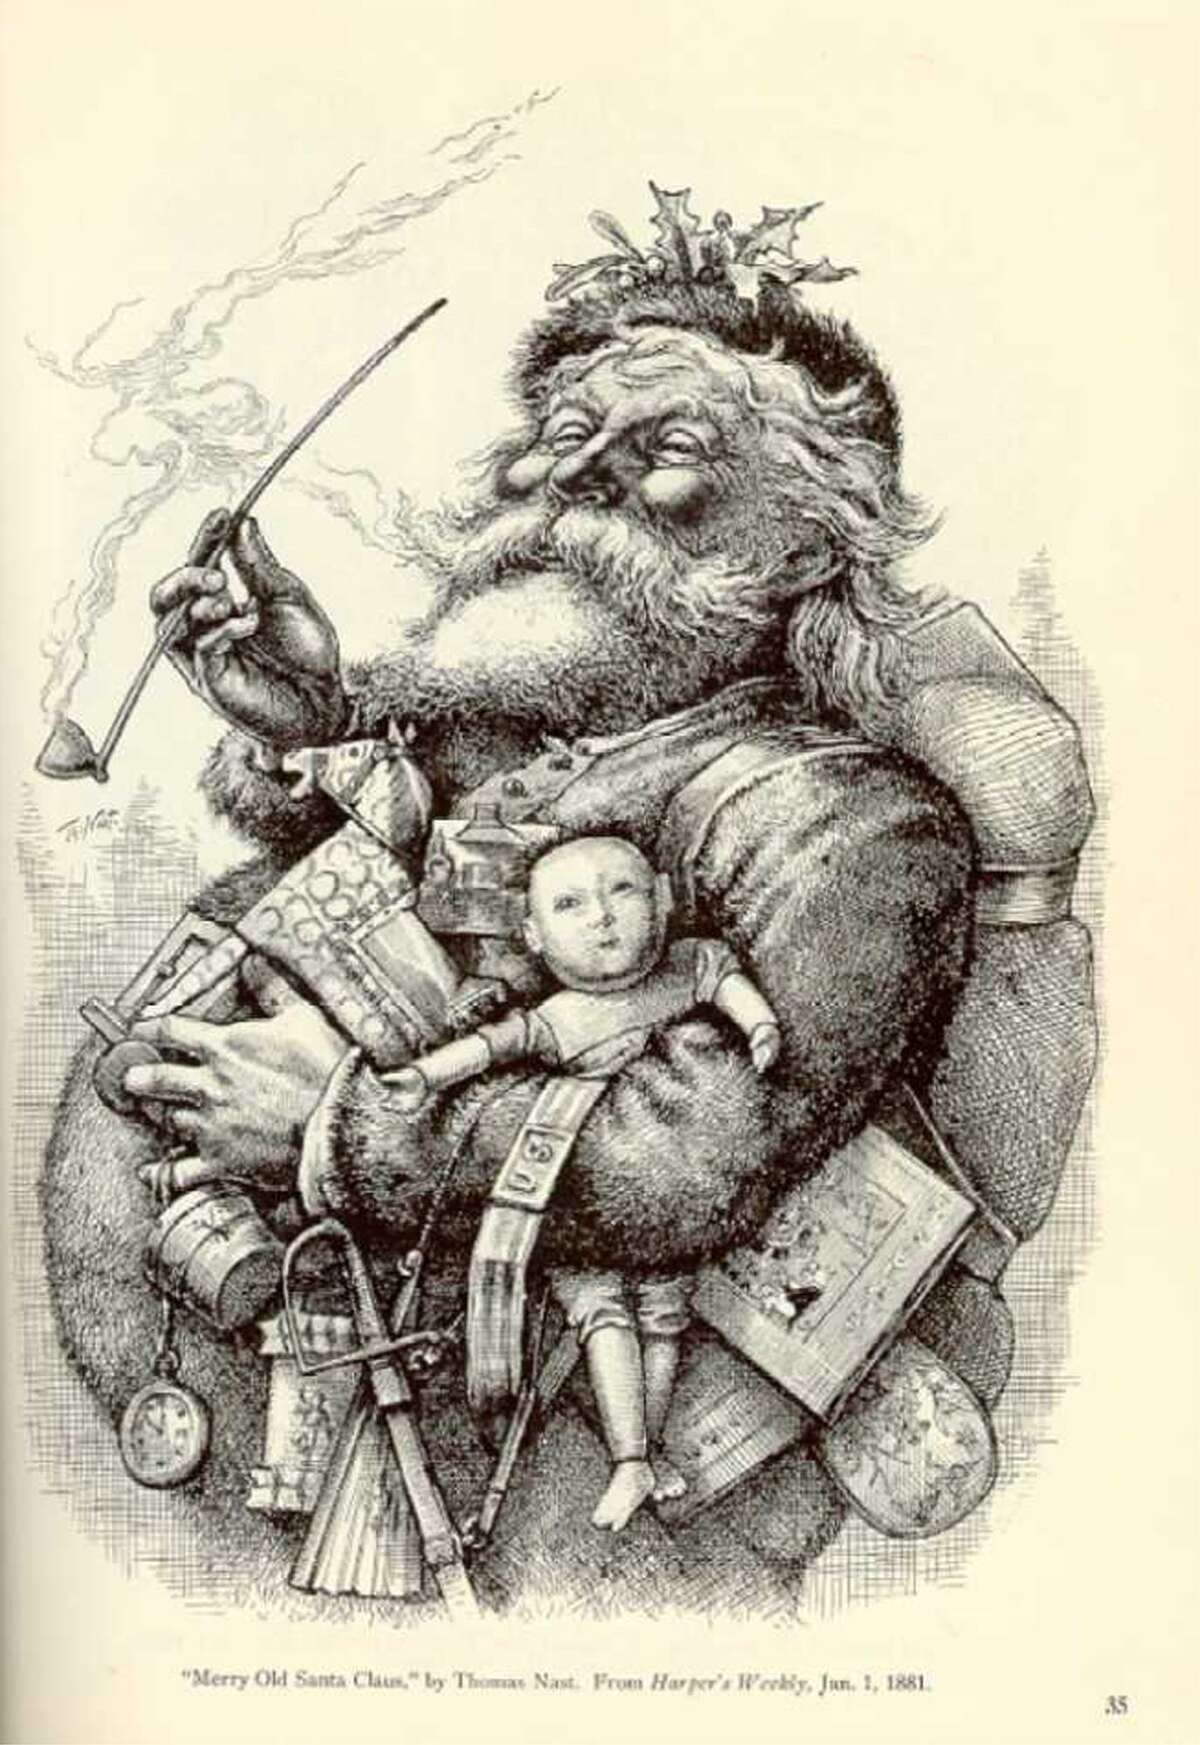 The image of a fat generous Santa Claus comes from this Thomas Nast illustration titled “Merry Old Santa Claus” from 1881.